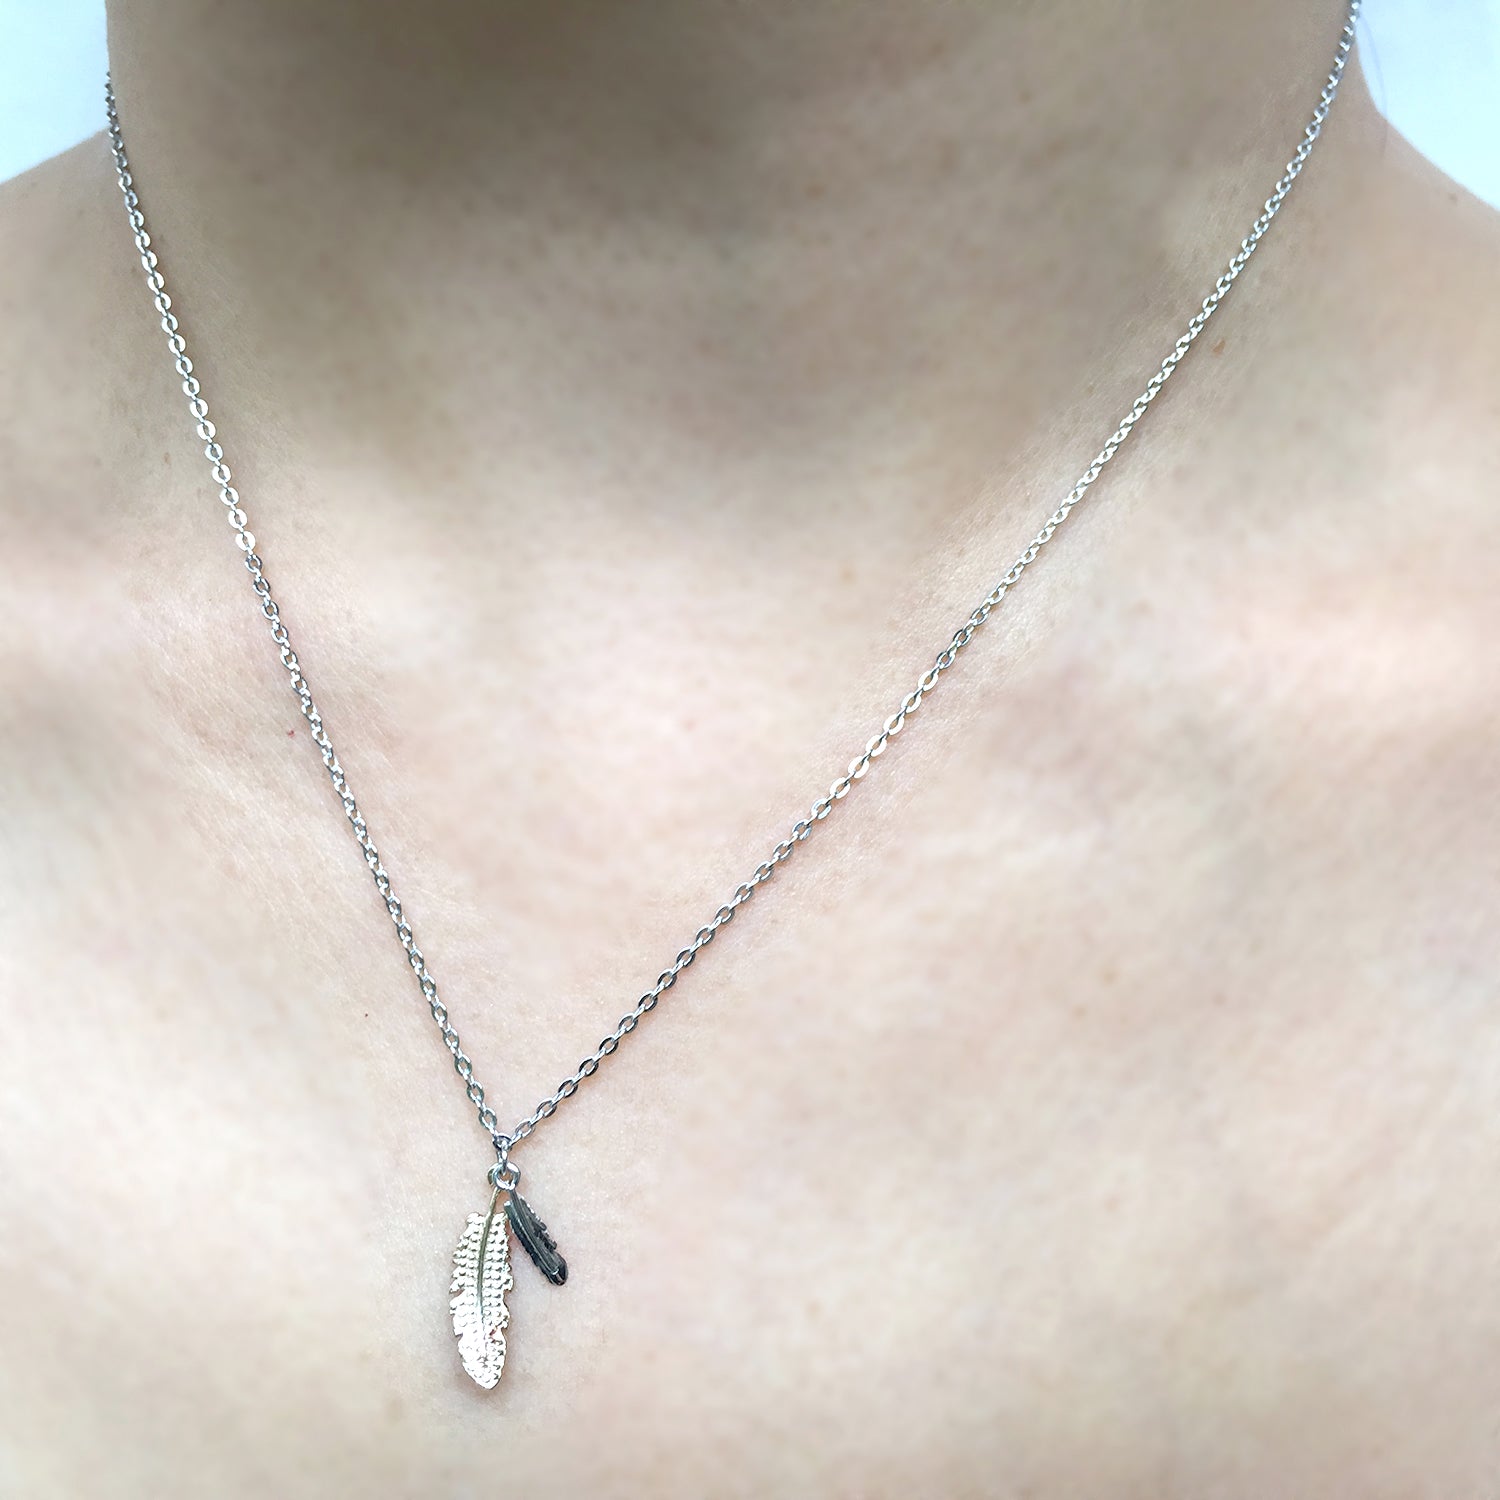 Tiny Silver Necklace, Small Feather Necklace, Minimalist Jewelry